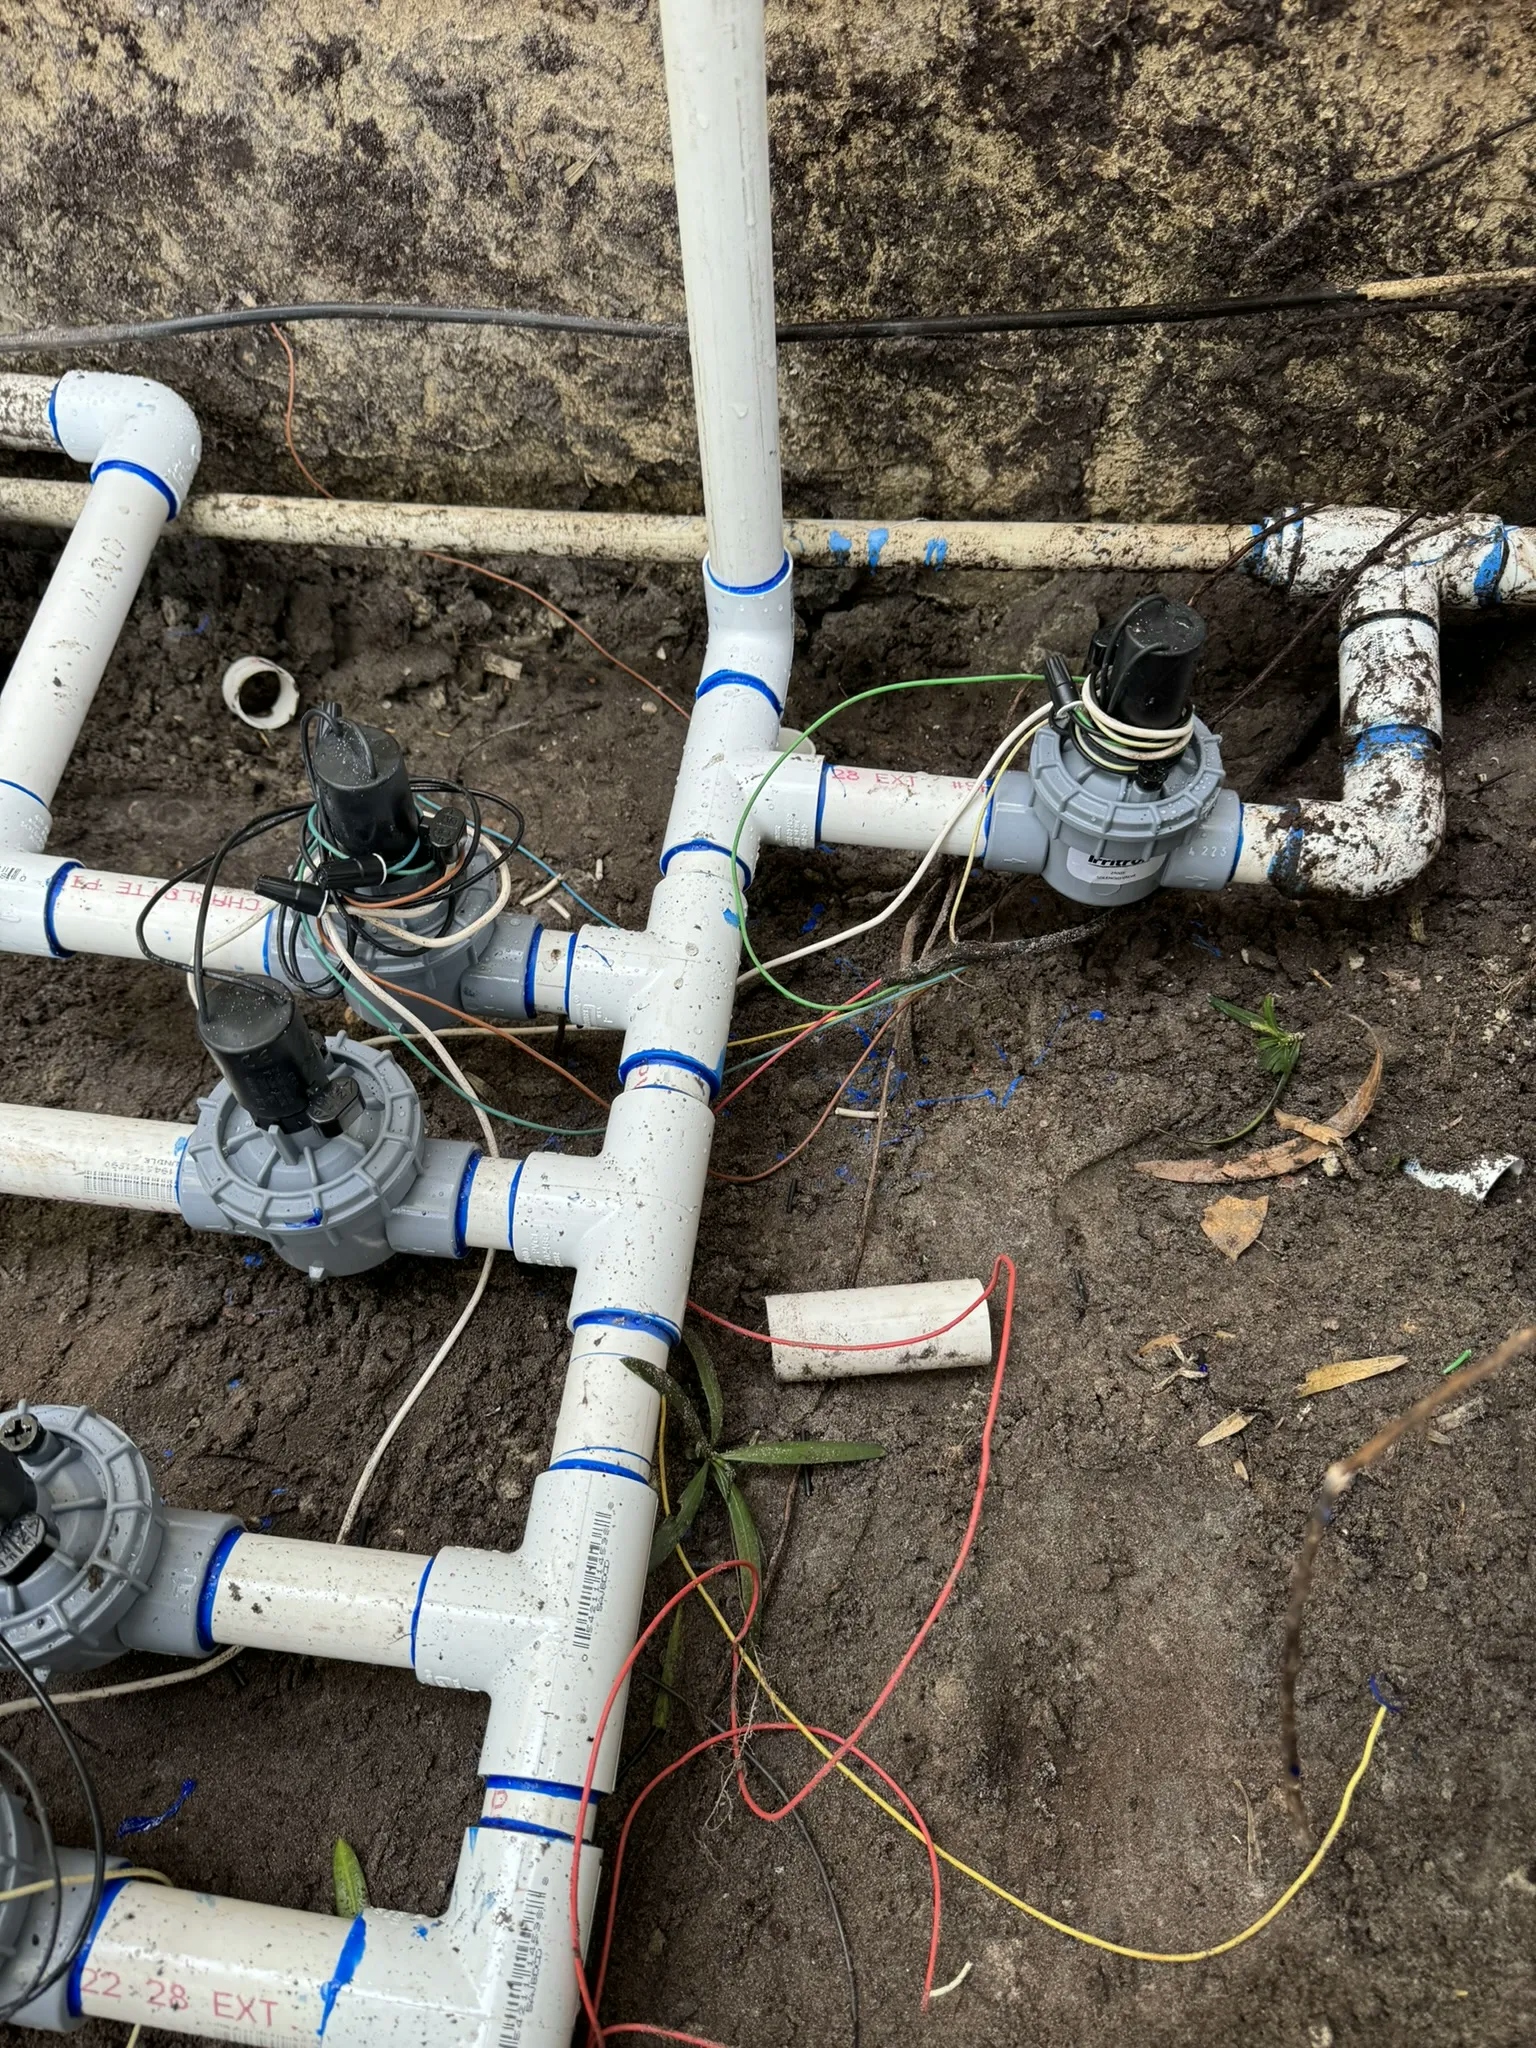 A sprinkler system is installed in a yard. The white PVC pipes are connected to the water source and the sprinkler heads are placed in the ground.